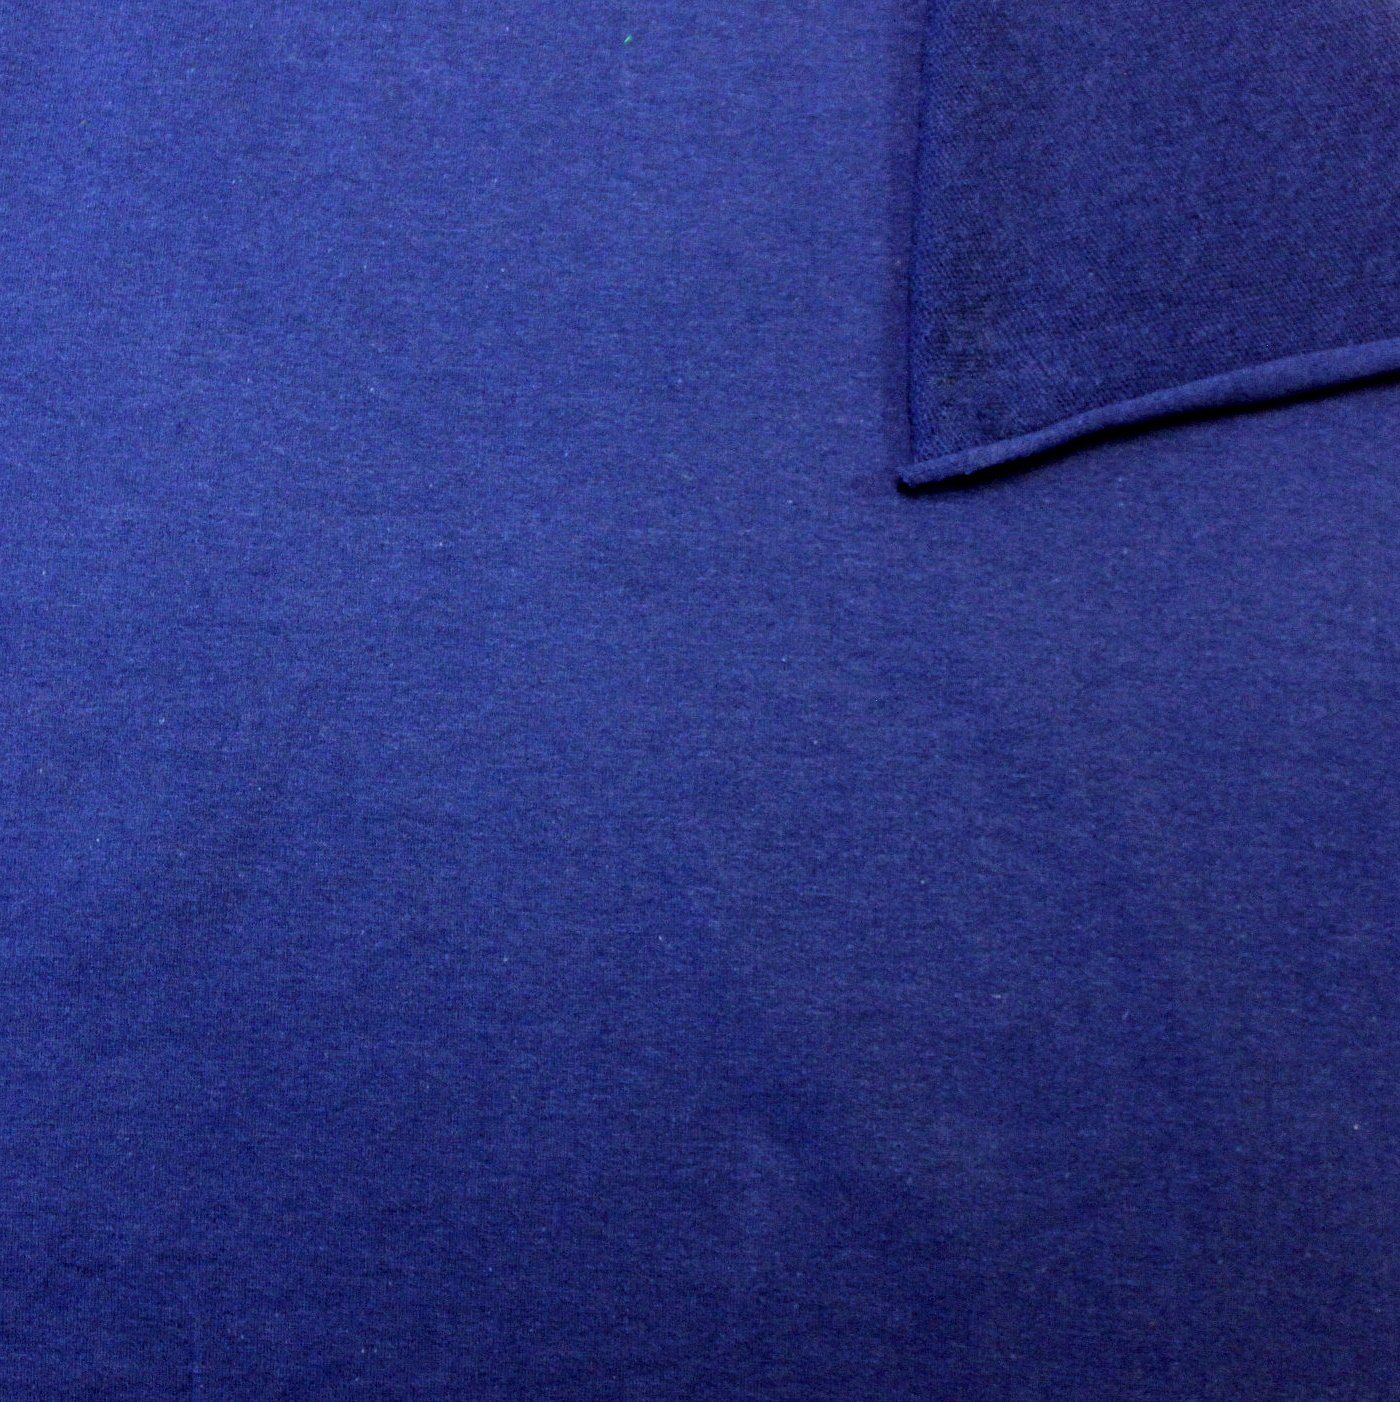 FREE SHIPPING!!! Navy French Terry Brushed Fleece Fabric, DIY